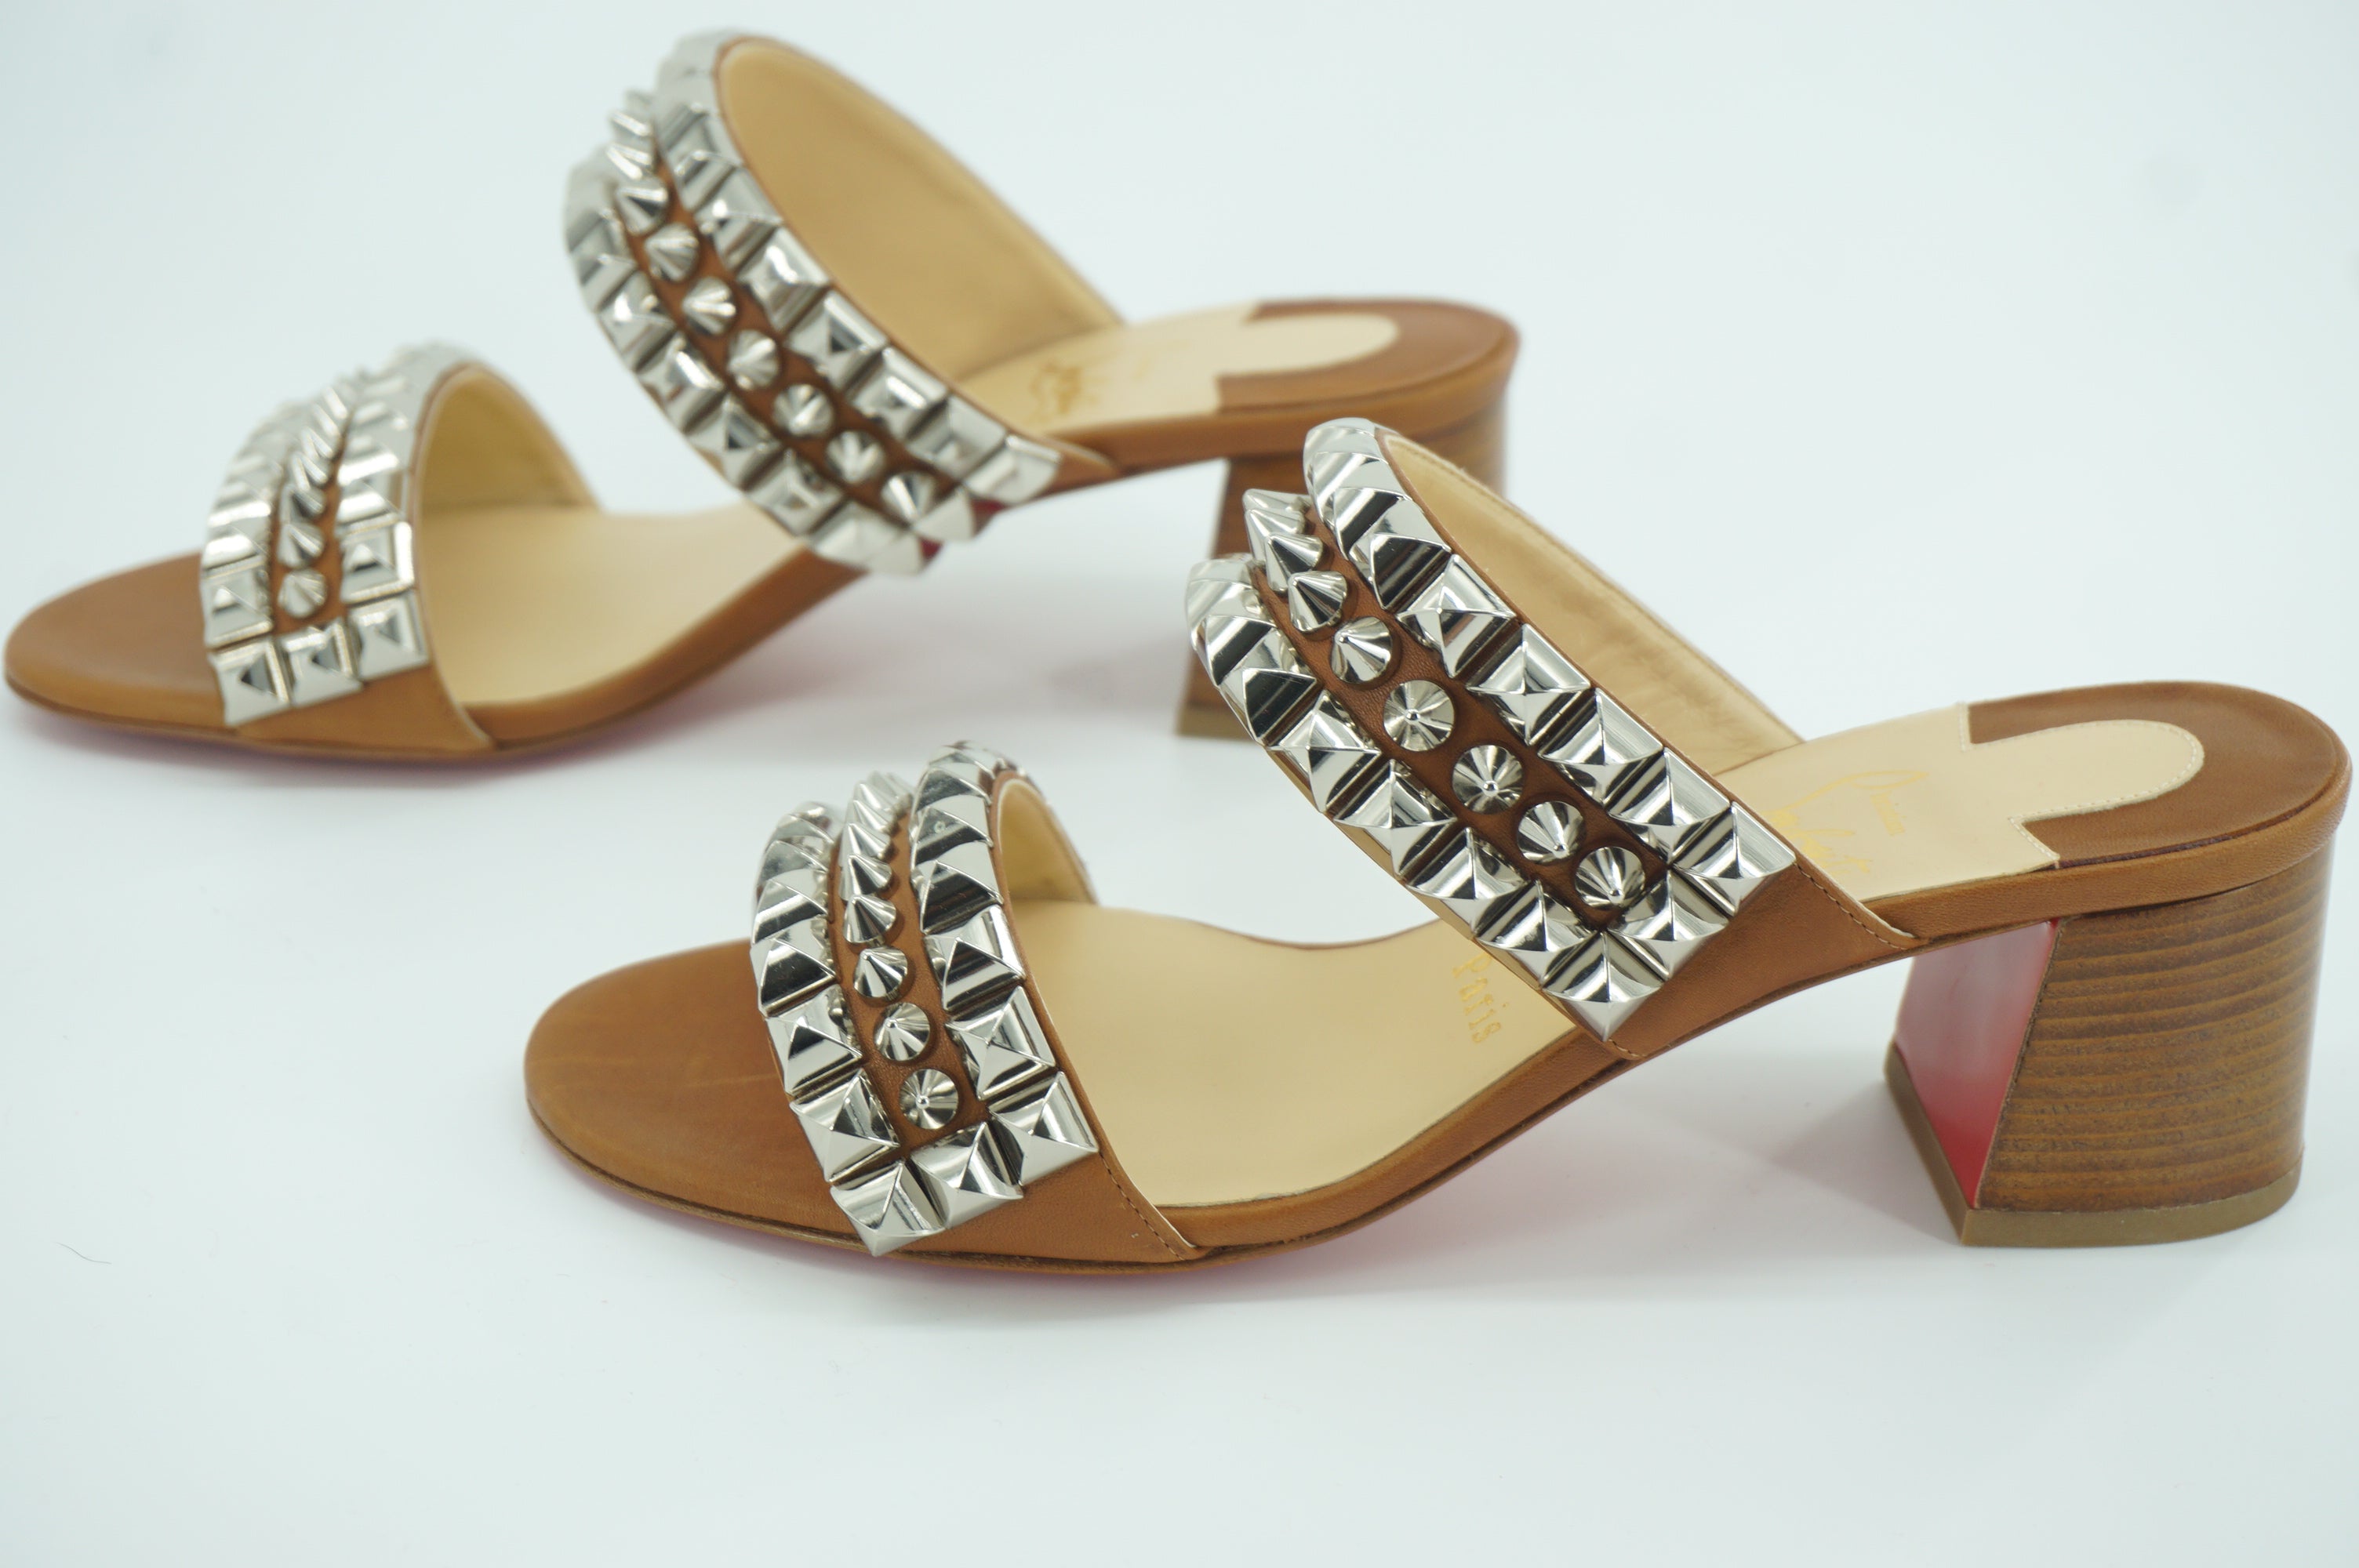 Christian Louboutin Tina Goes Mad Studded Sandal Size 37 New $795 Brown Leather